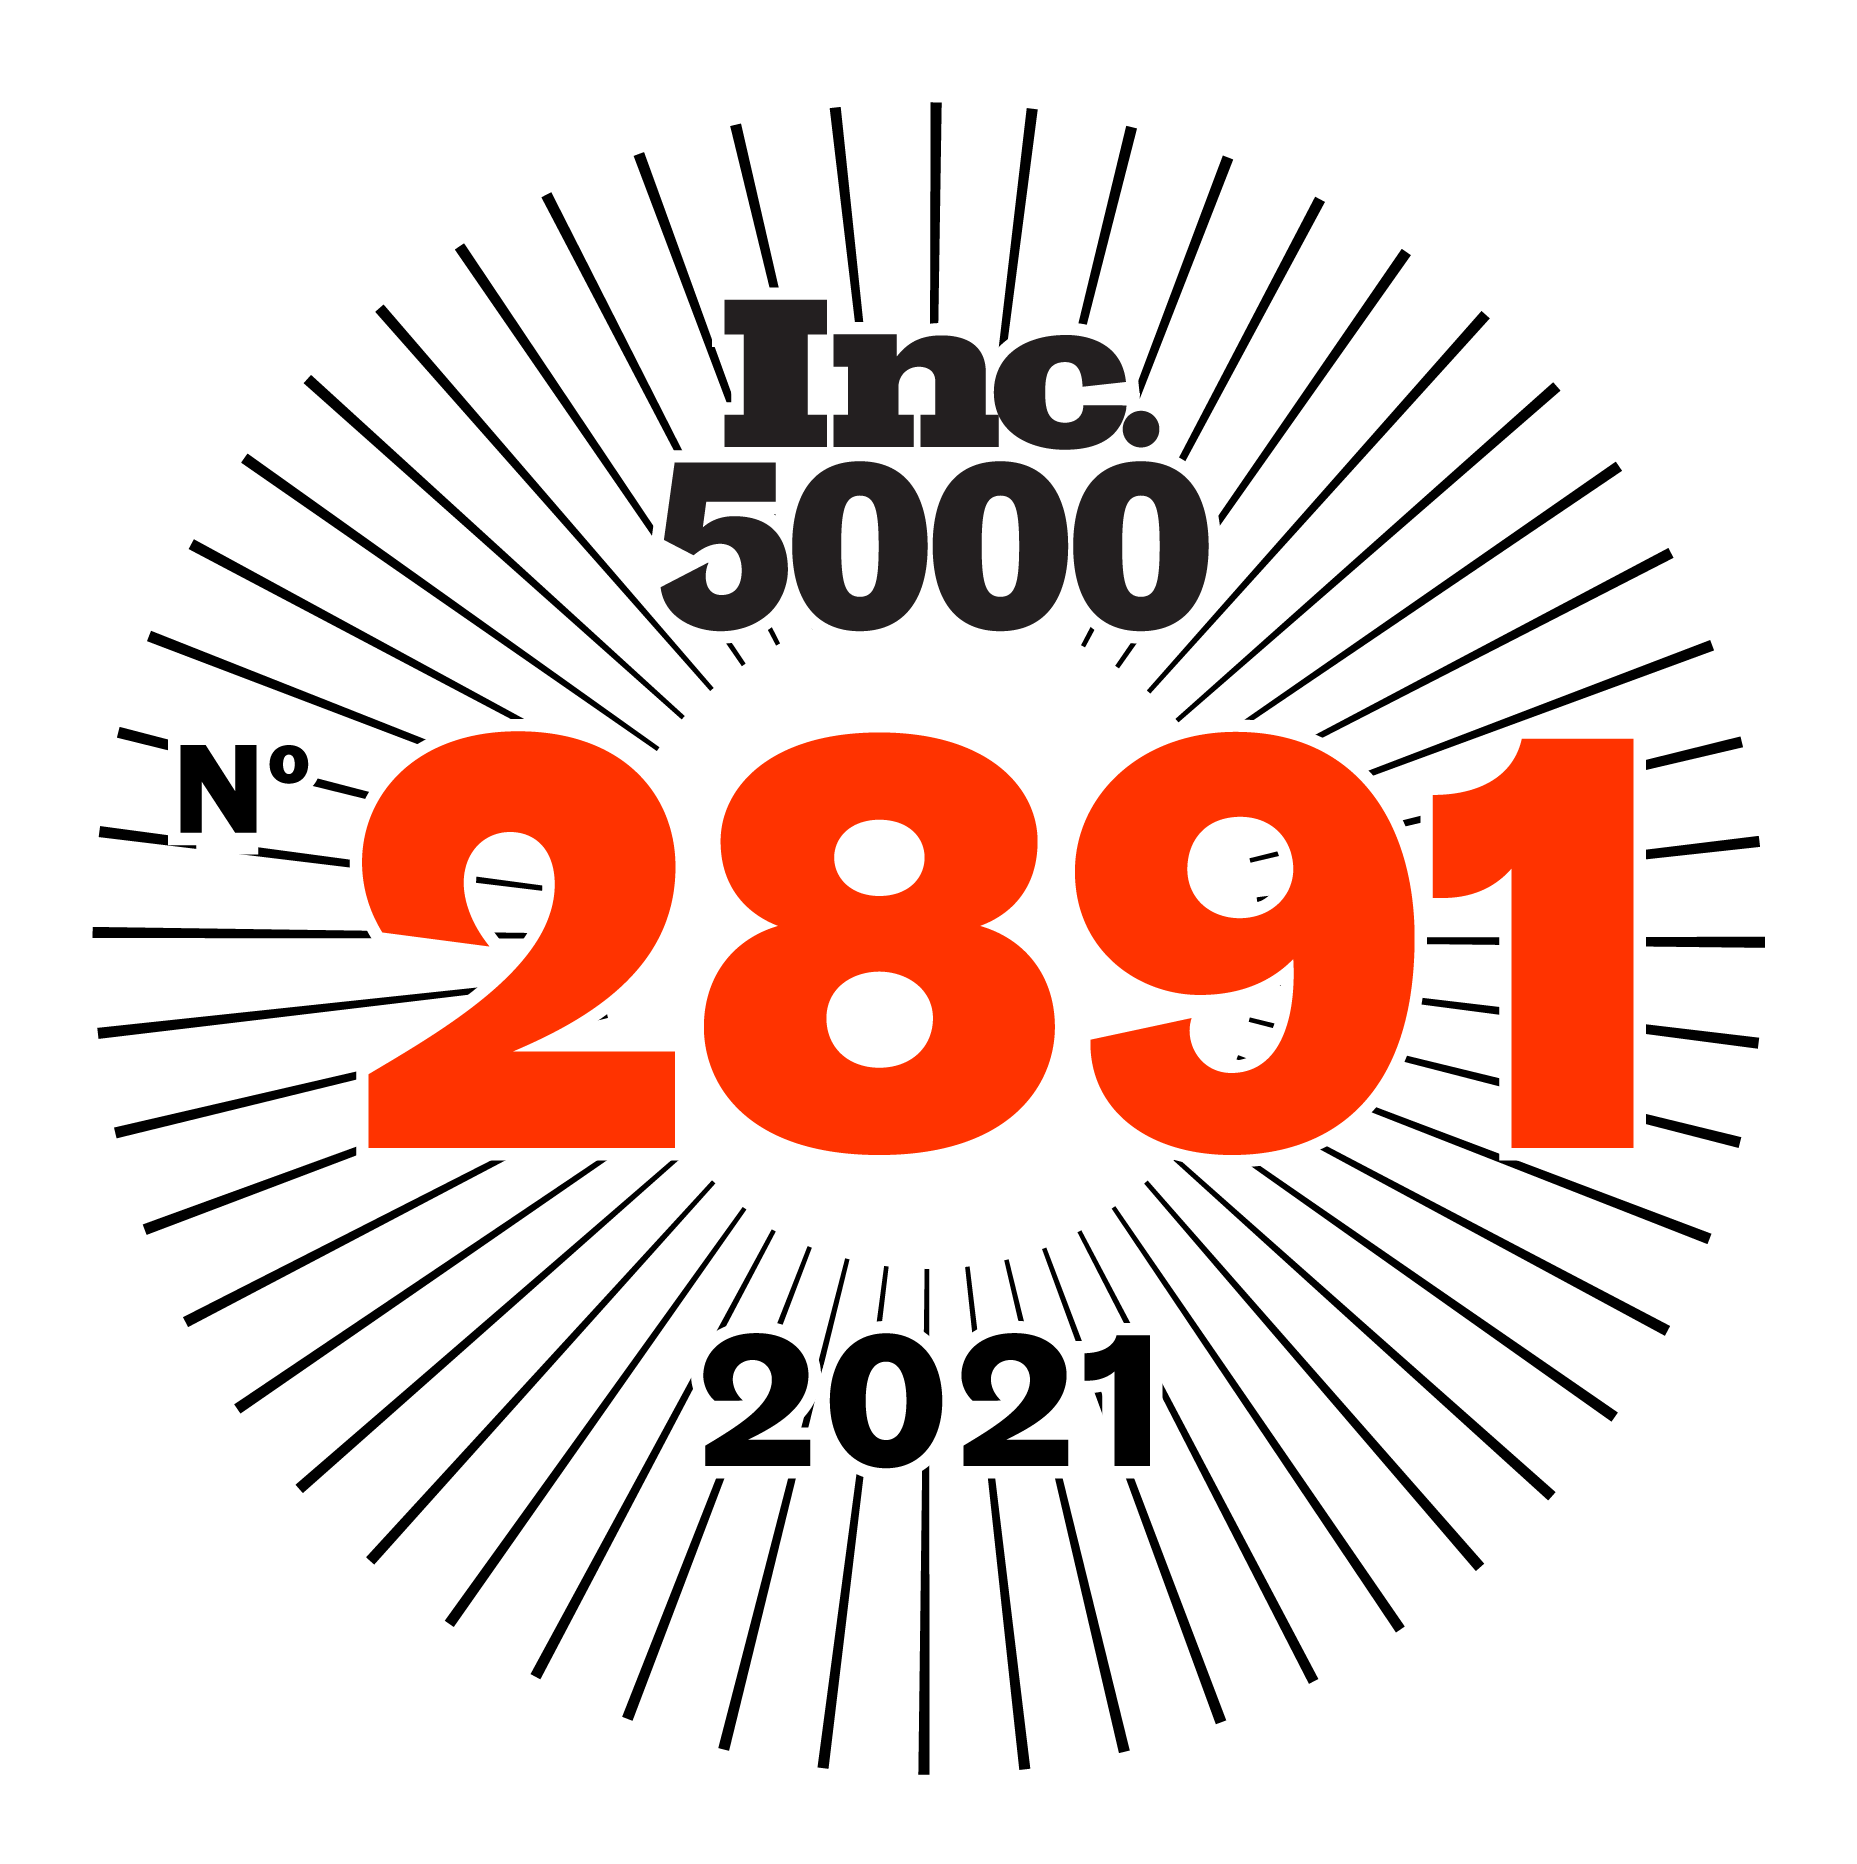 Summit Companies Named on Inc. 5000 List for Second Consecutive Year